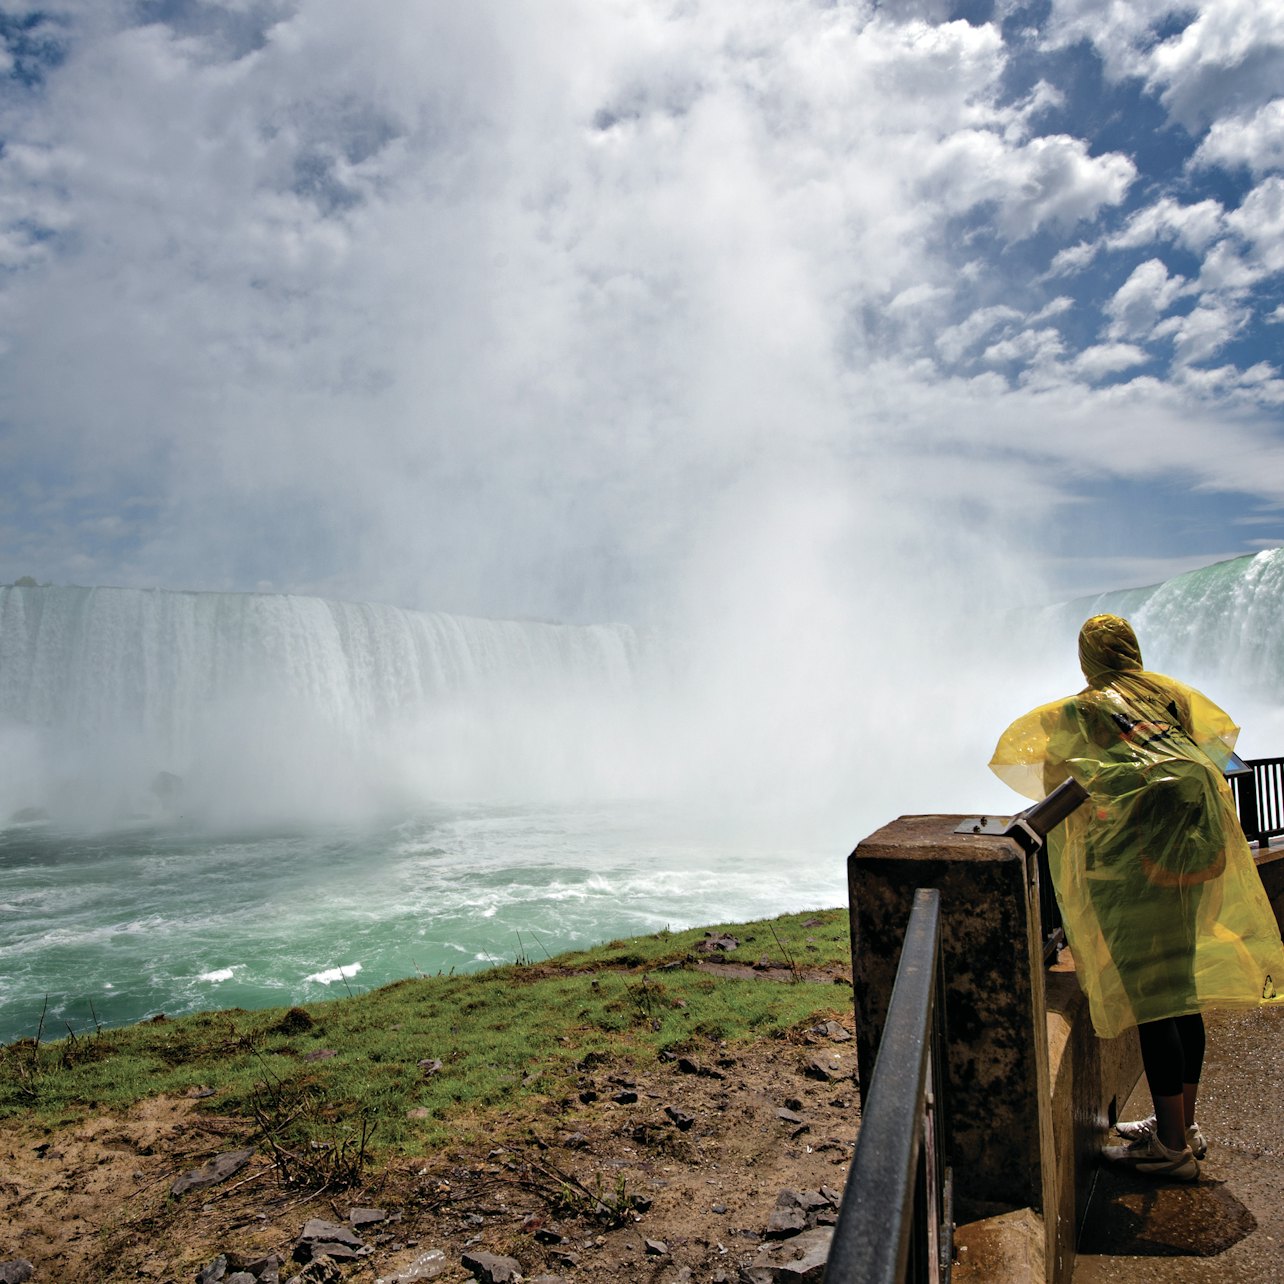 Journey Behind the Falls - Accommodations in Niagara Falls